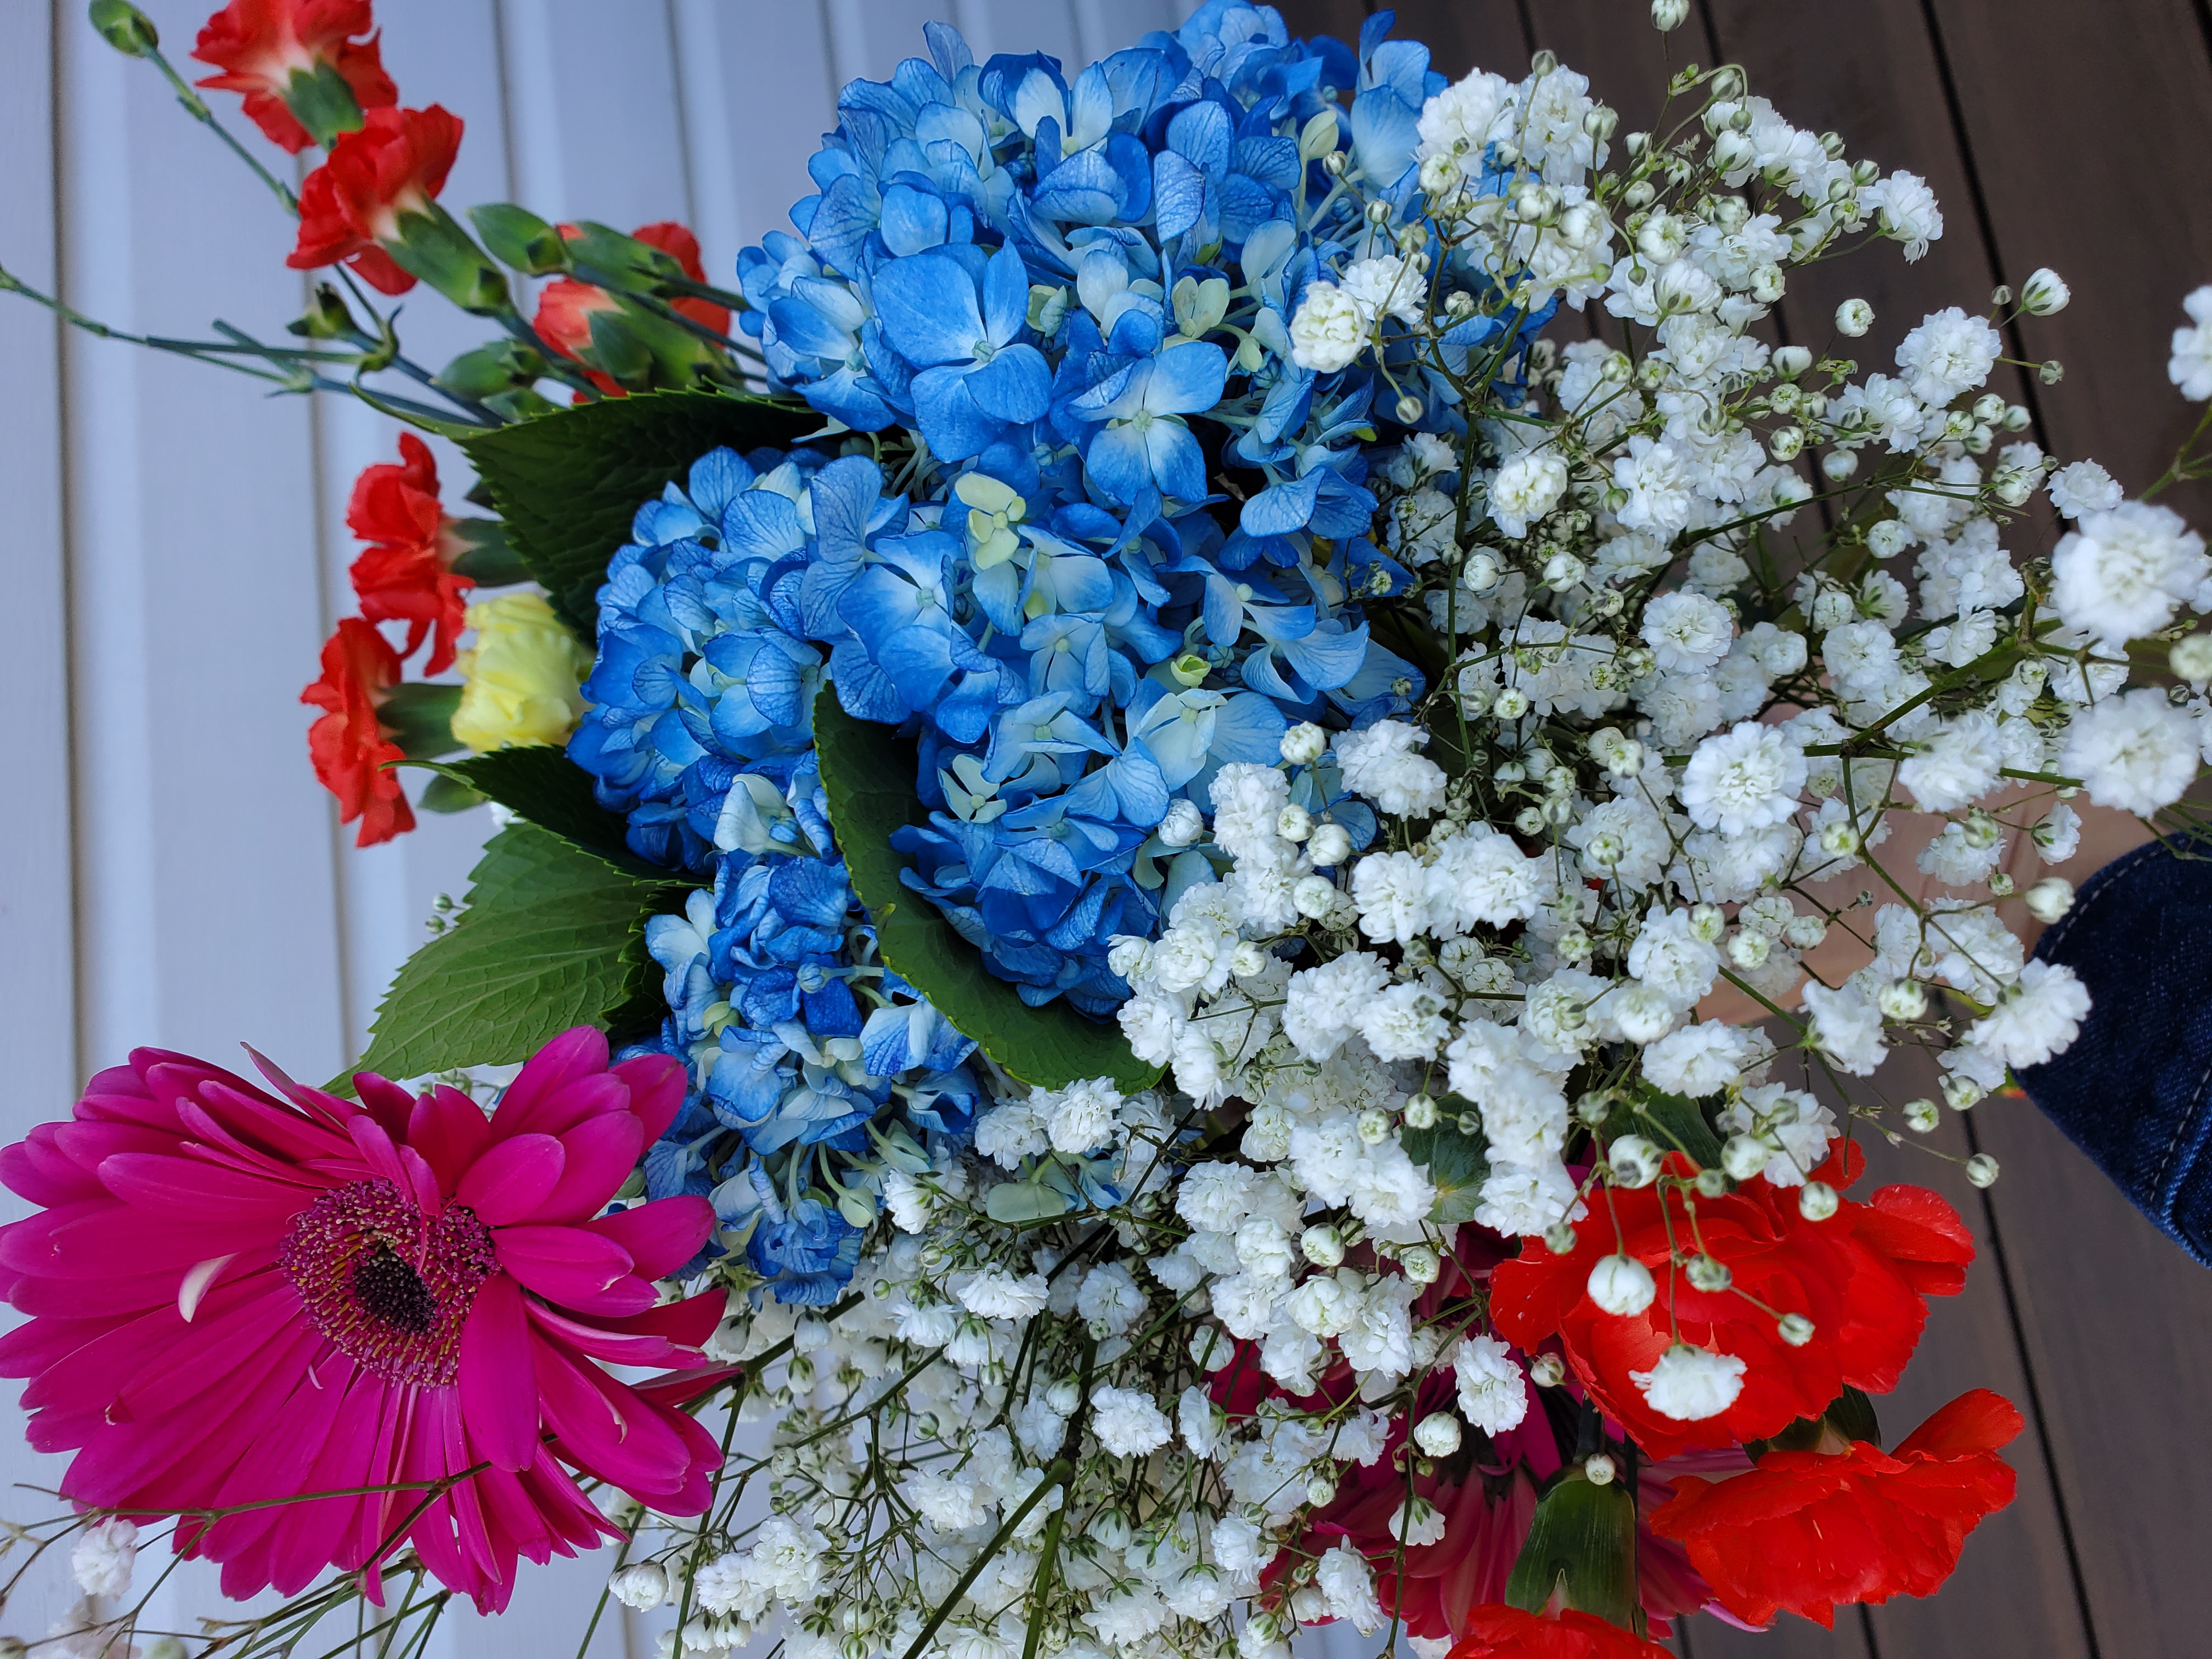 A bouquet of colourful flowers